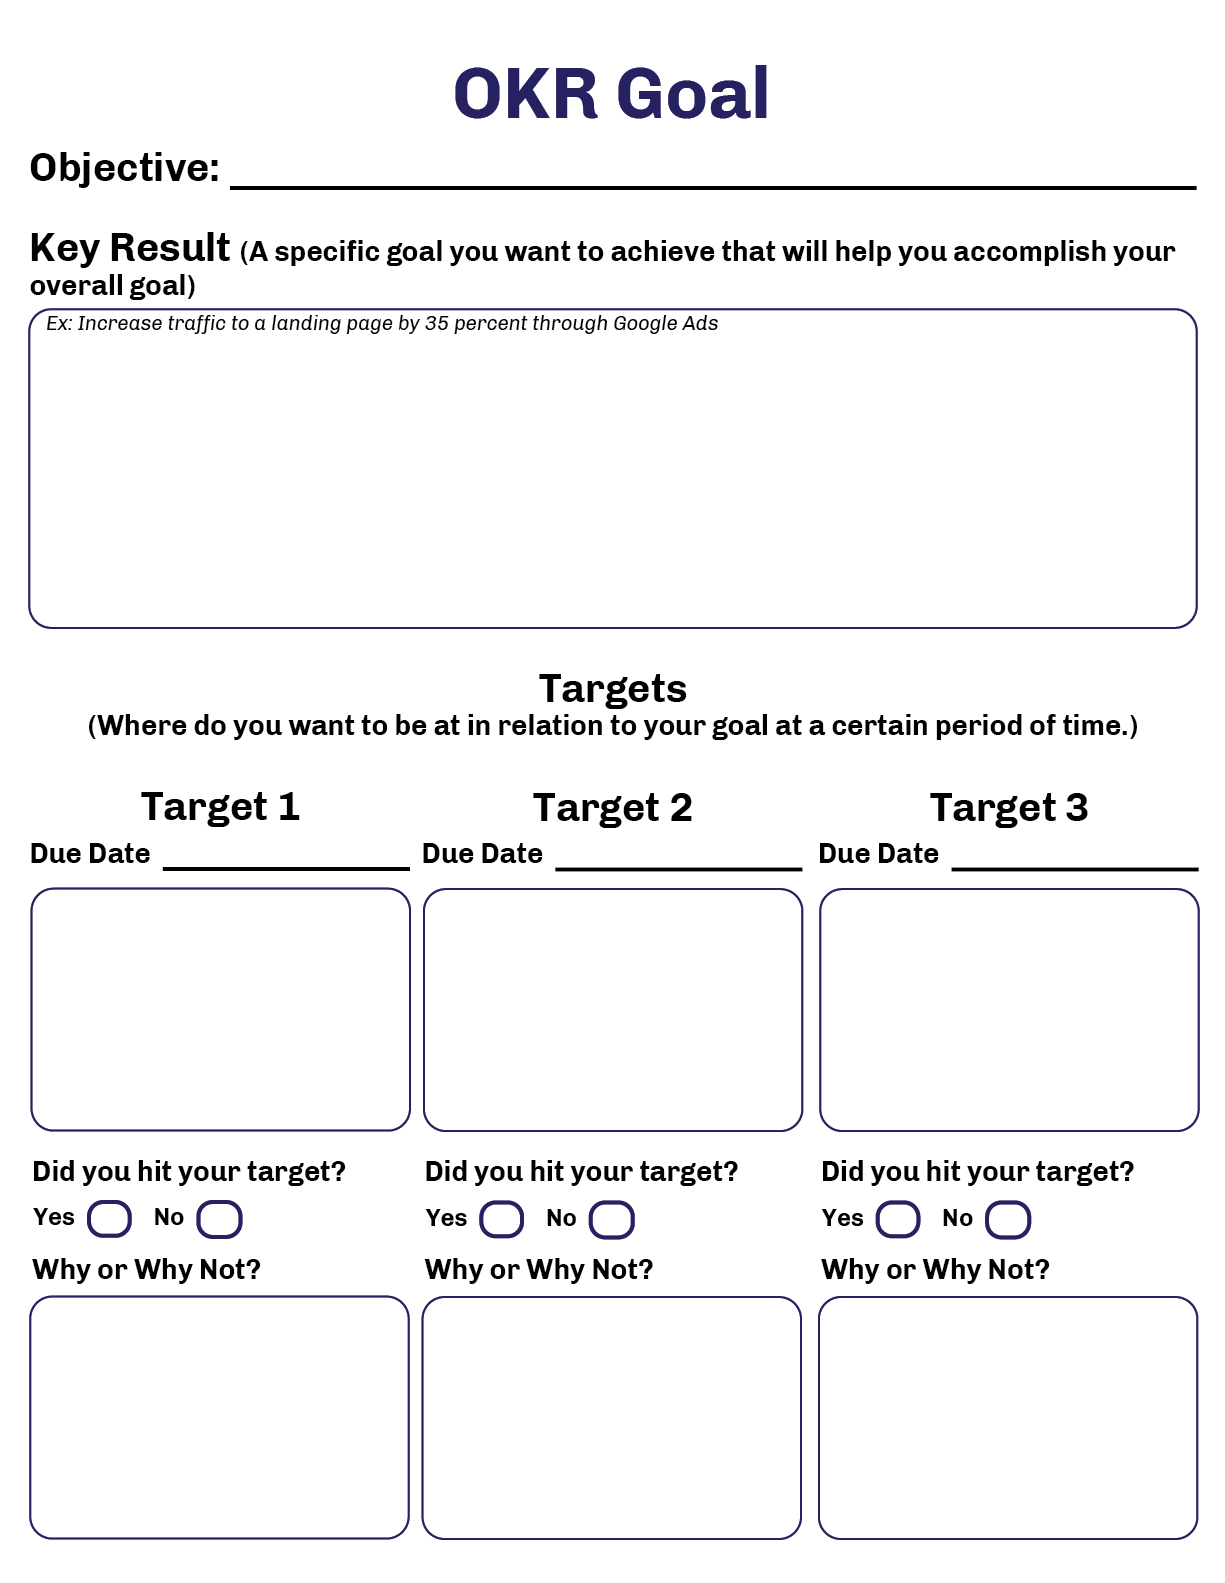 Objective and Key Results worksheet